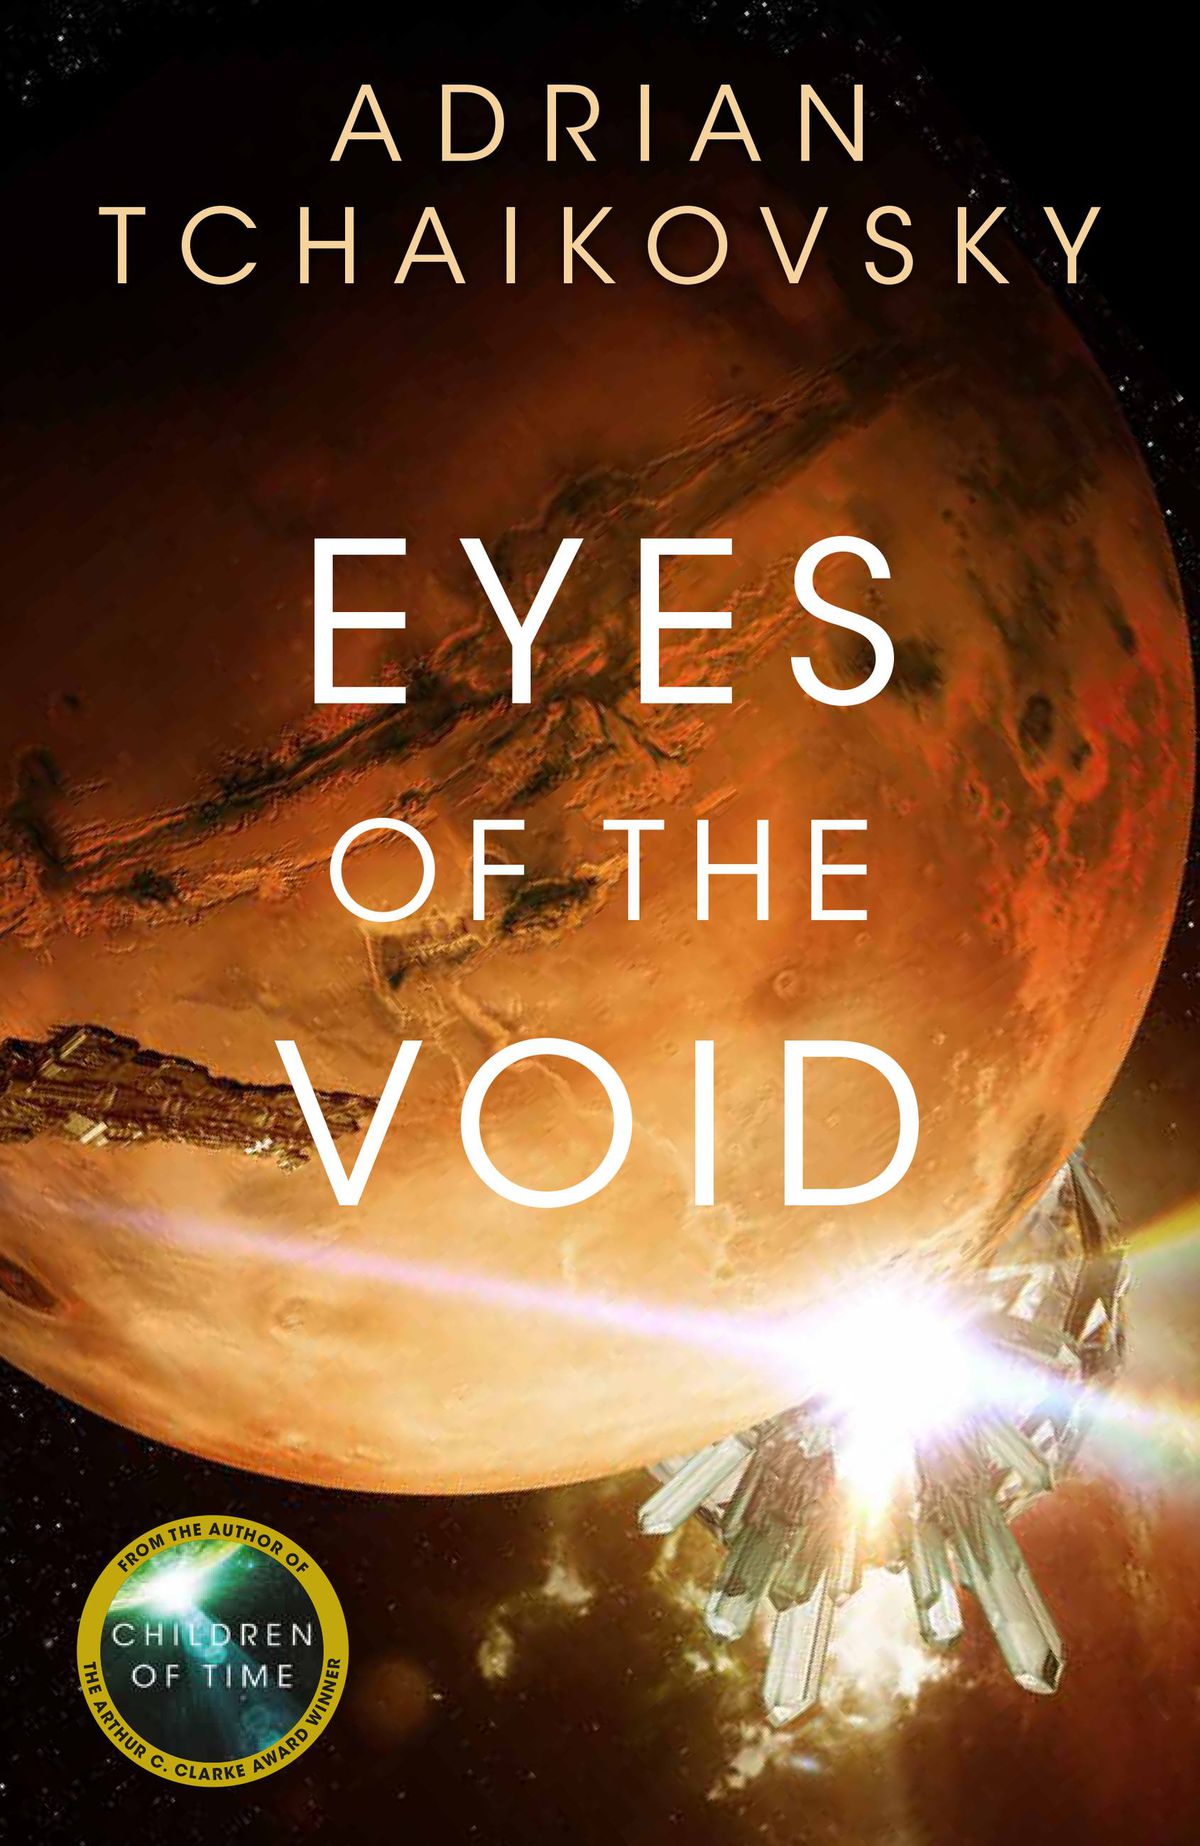 The cover for Eyes of the Void showing a planet and crystal formations